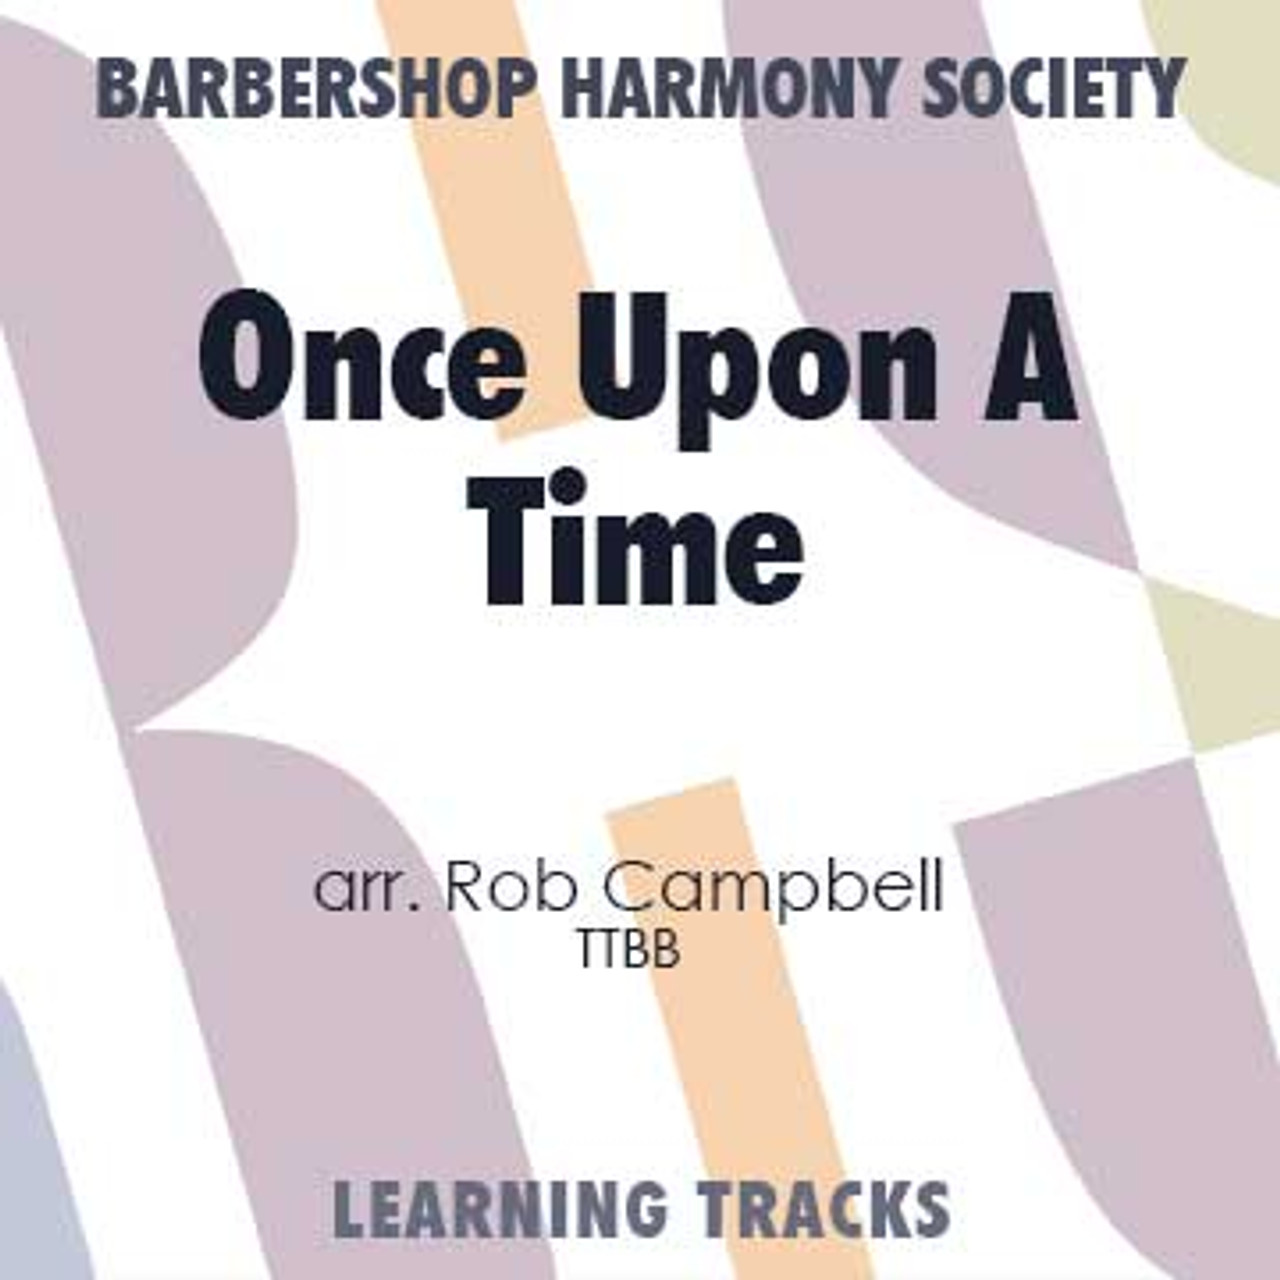 Once Upon A Time (TTBB) (arr. Campbell) - Digital Learning Tracks for 8823